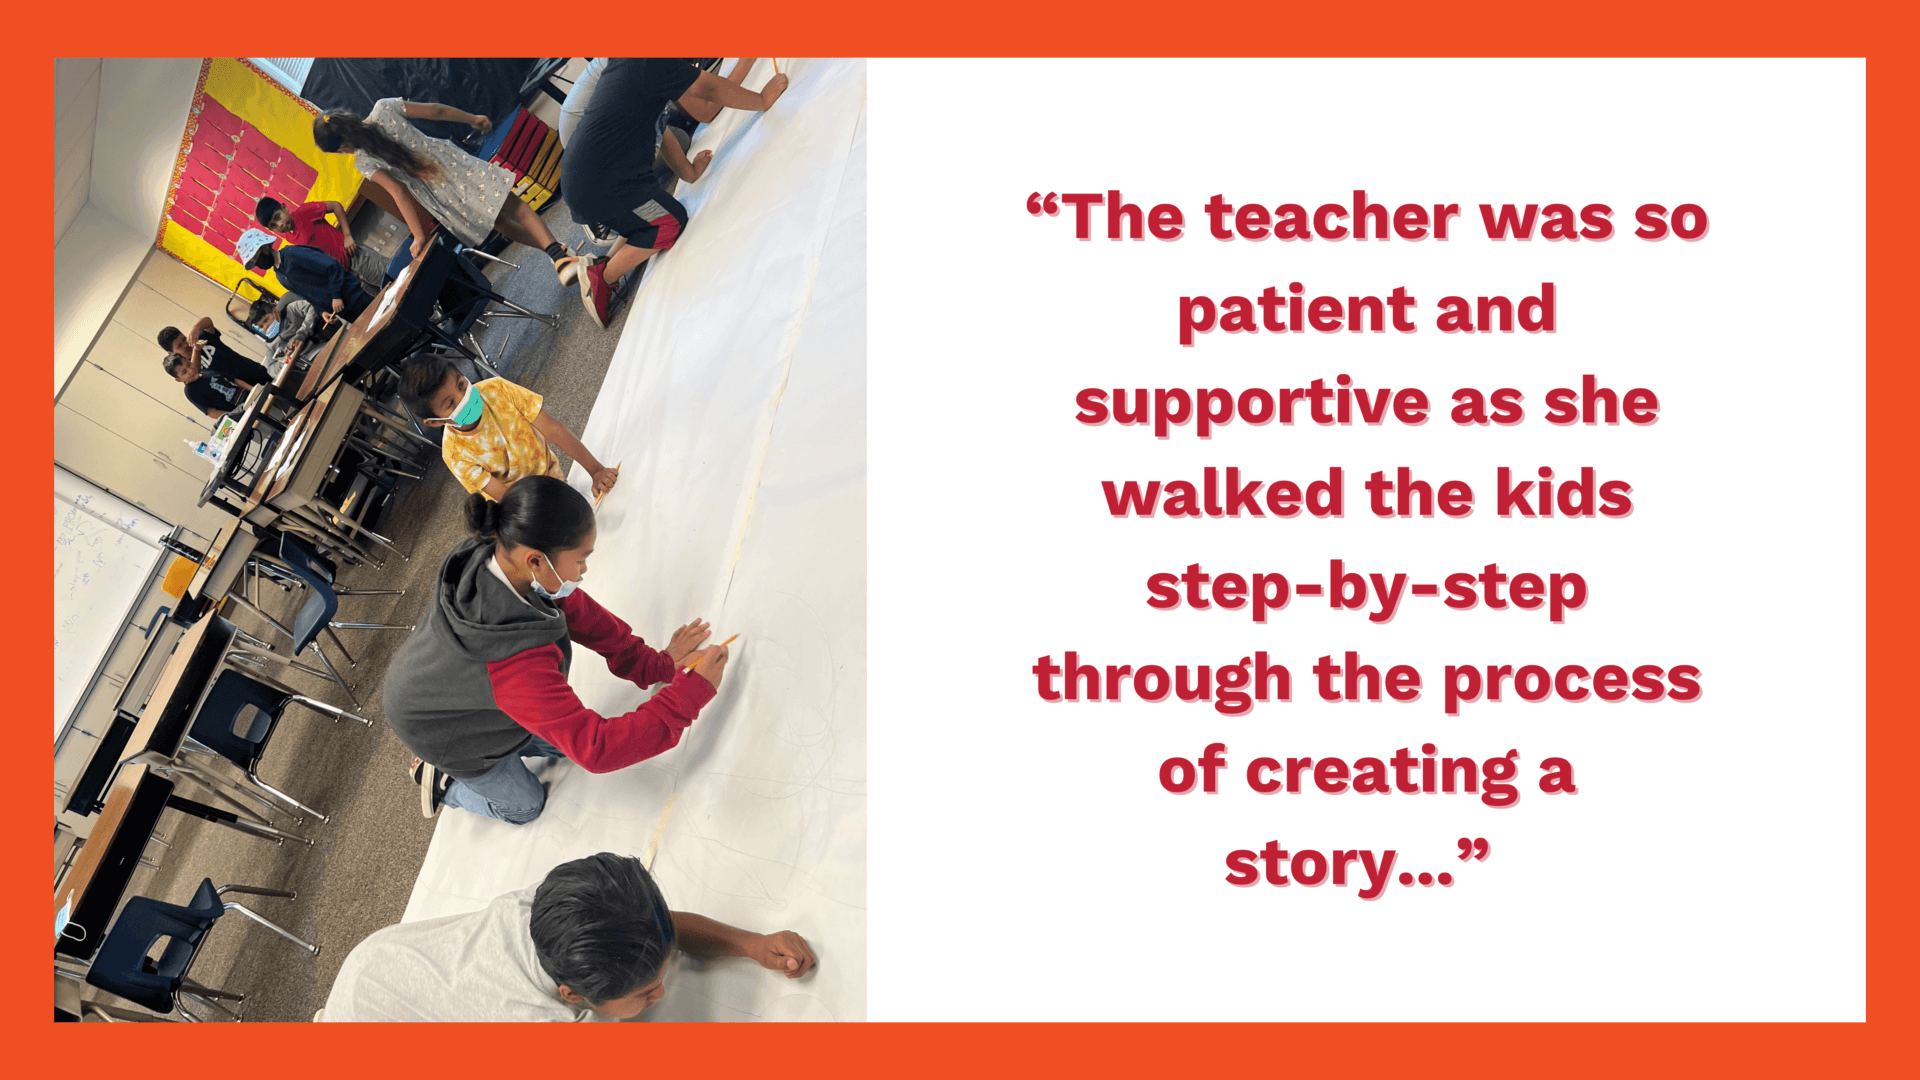 "The teacher was so patient and supportive as she walked the kids step-by-step through the process of creating a story..."